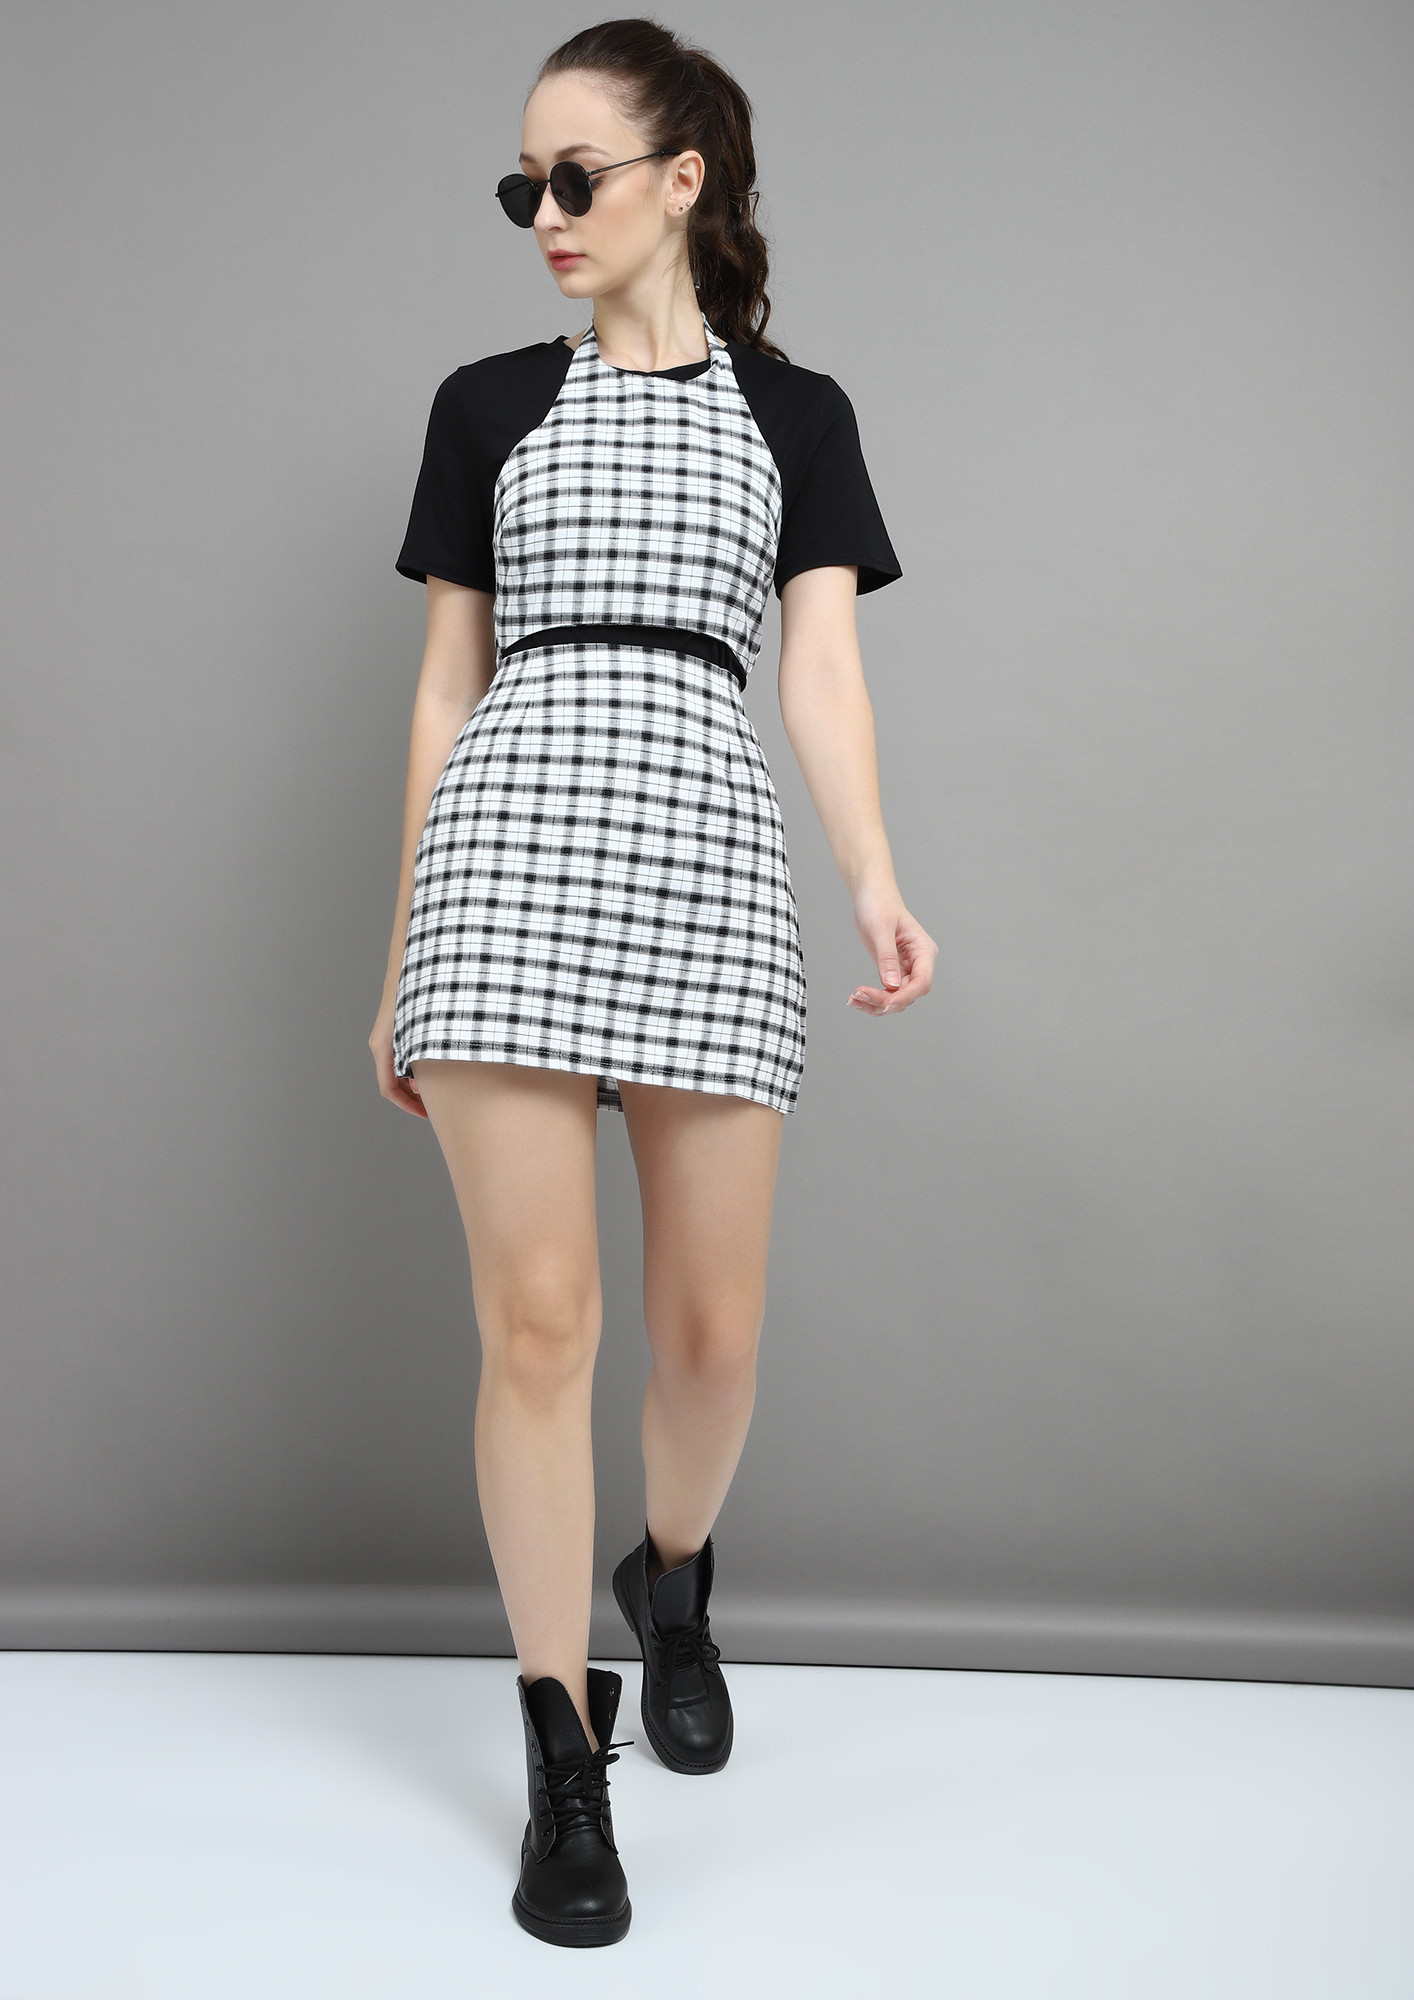 CHECKS RULE ALL BLACK AND WHITE TWO PIECE SET